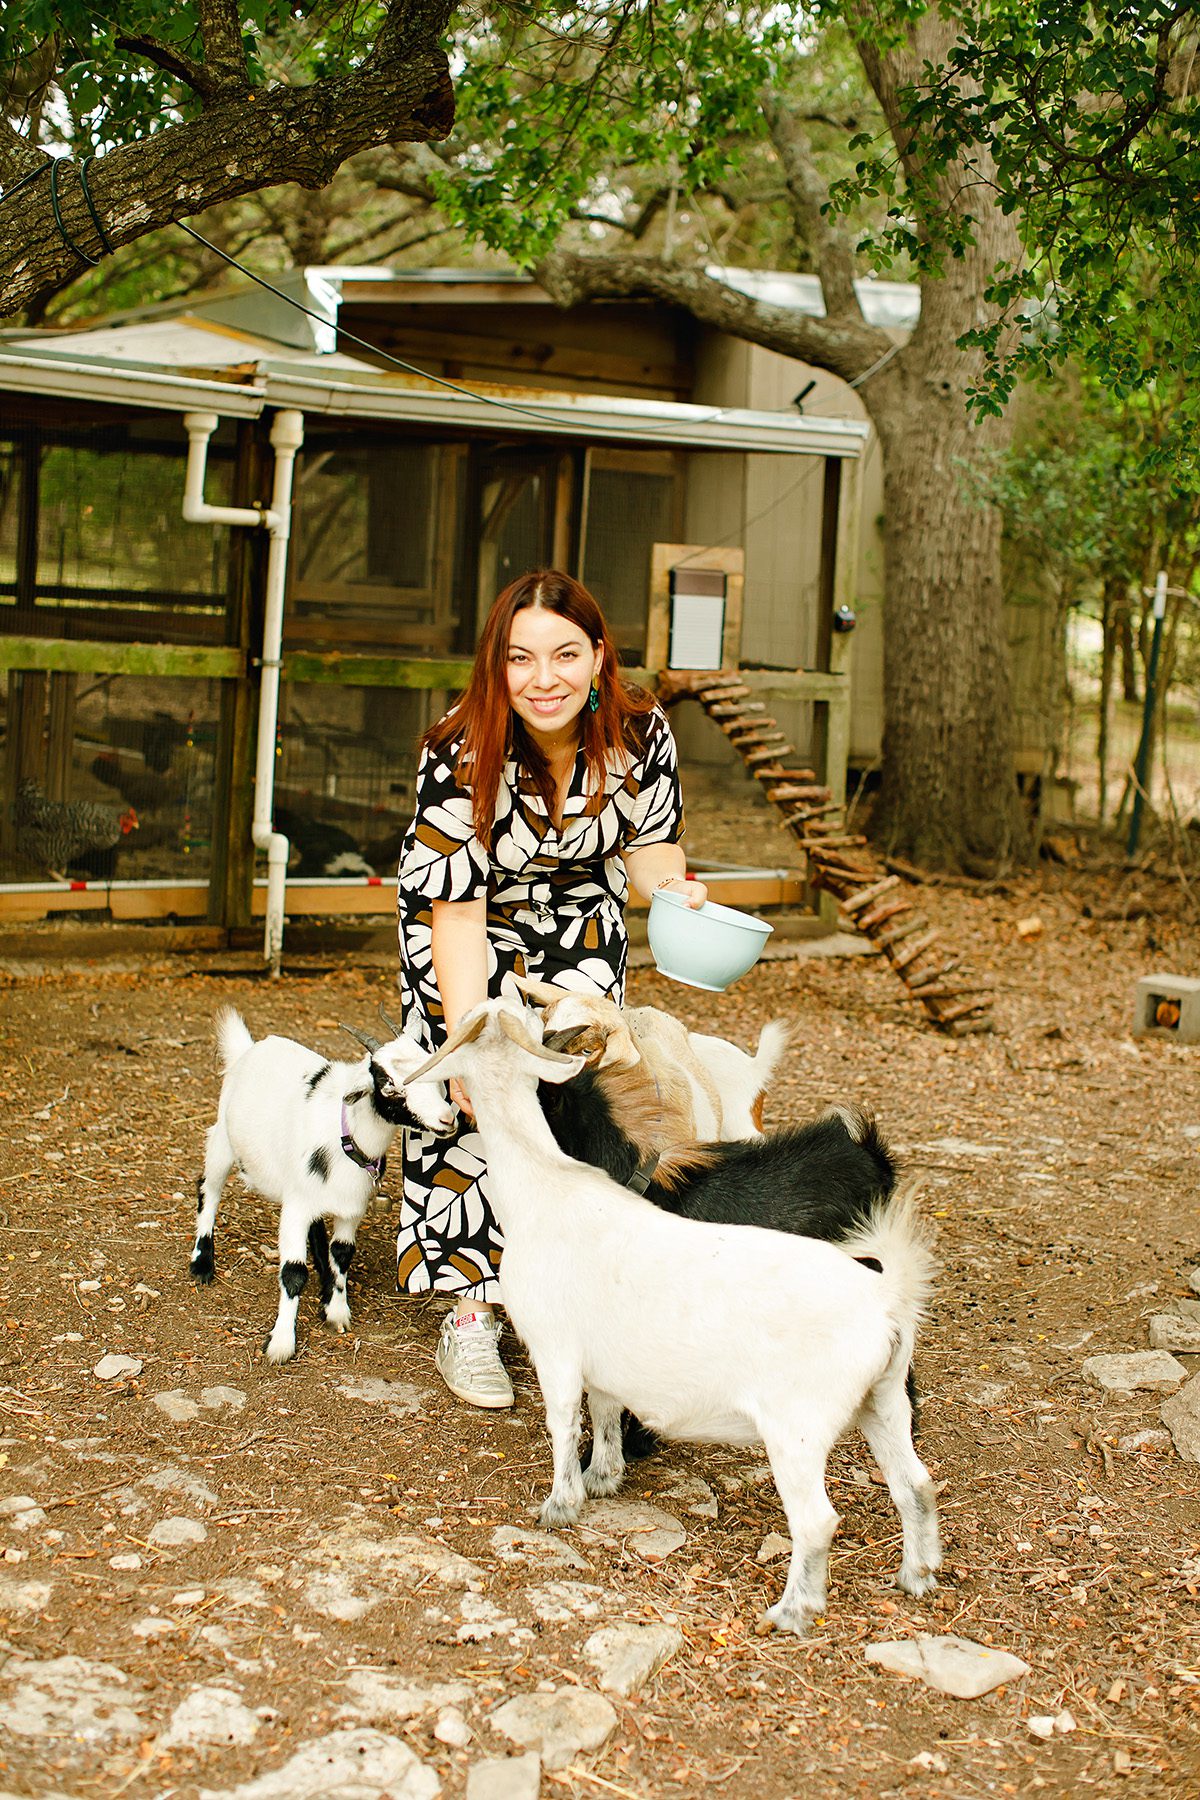 Natalie Blanco and her Norwegian Pygmy goats at Eco Ranch airbnb